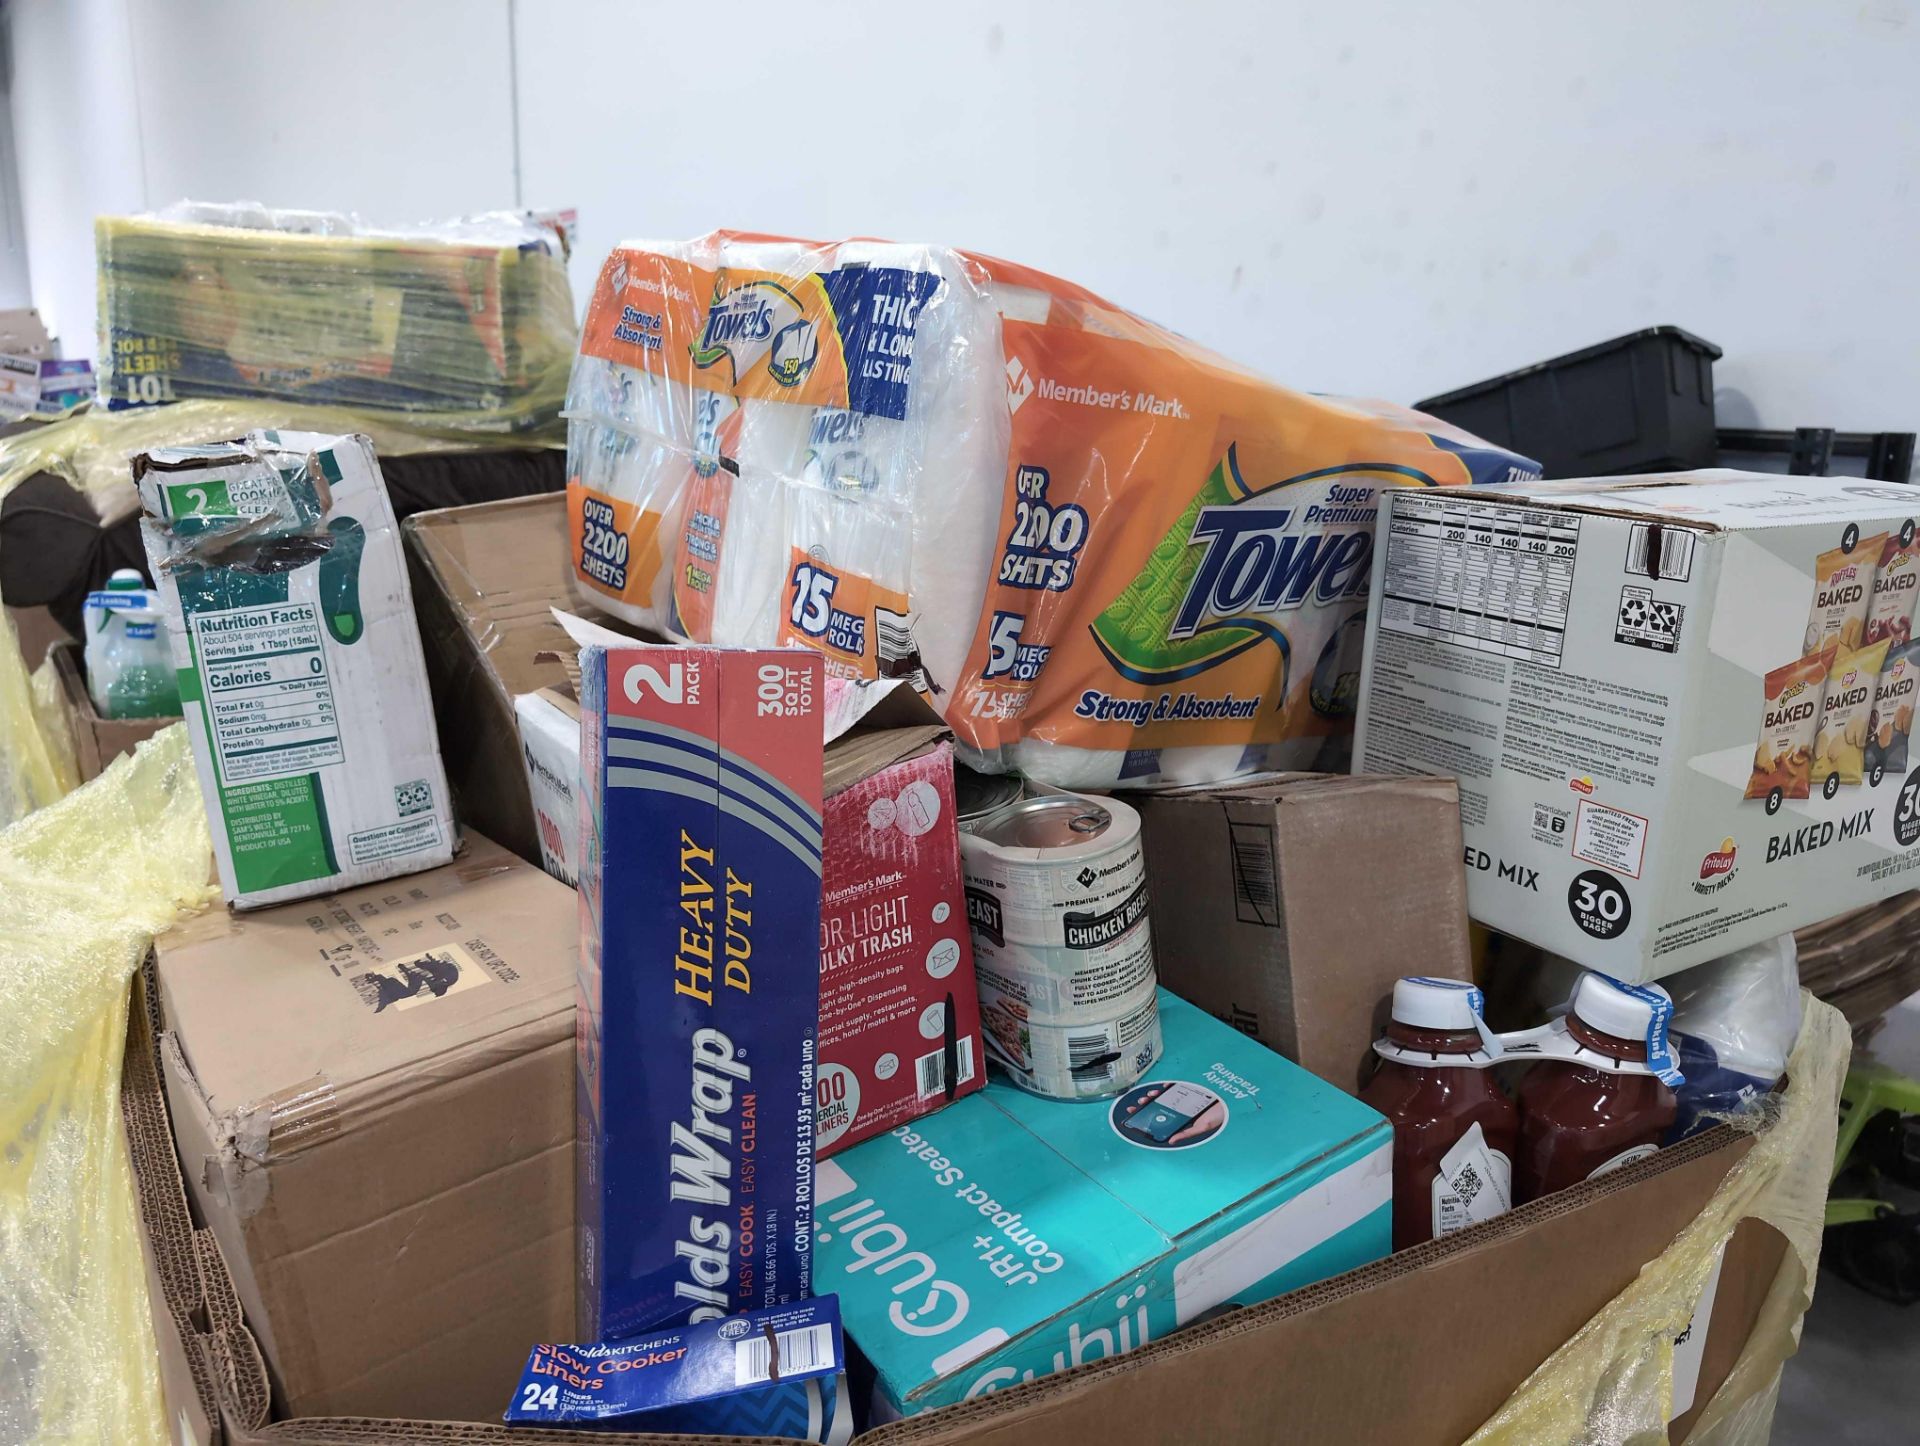 Big box store in a box: Canned chicke, Paper towels, baket chips, ketchup, trash liners, Cubii seate - Image 2 of 14